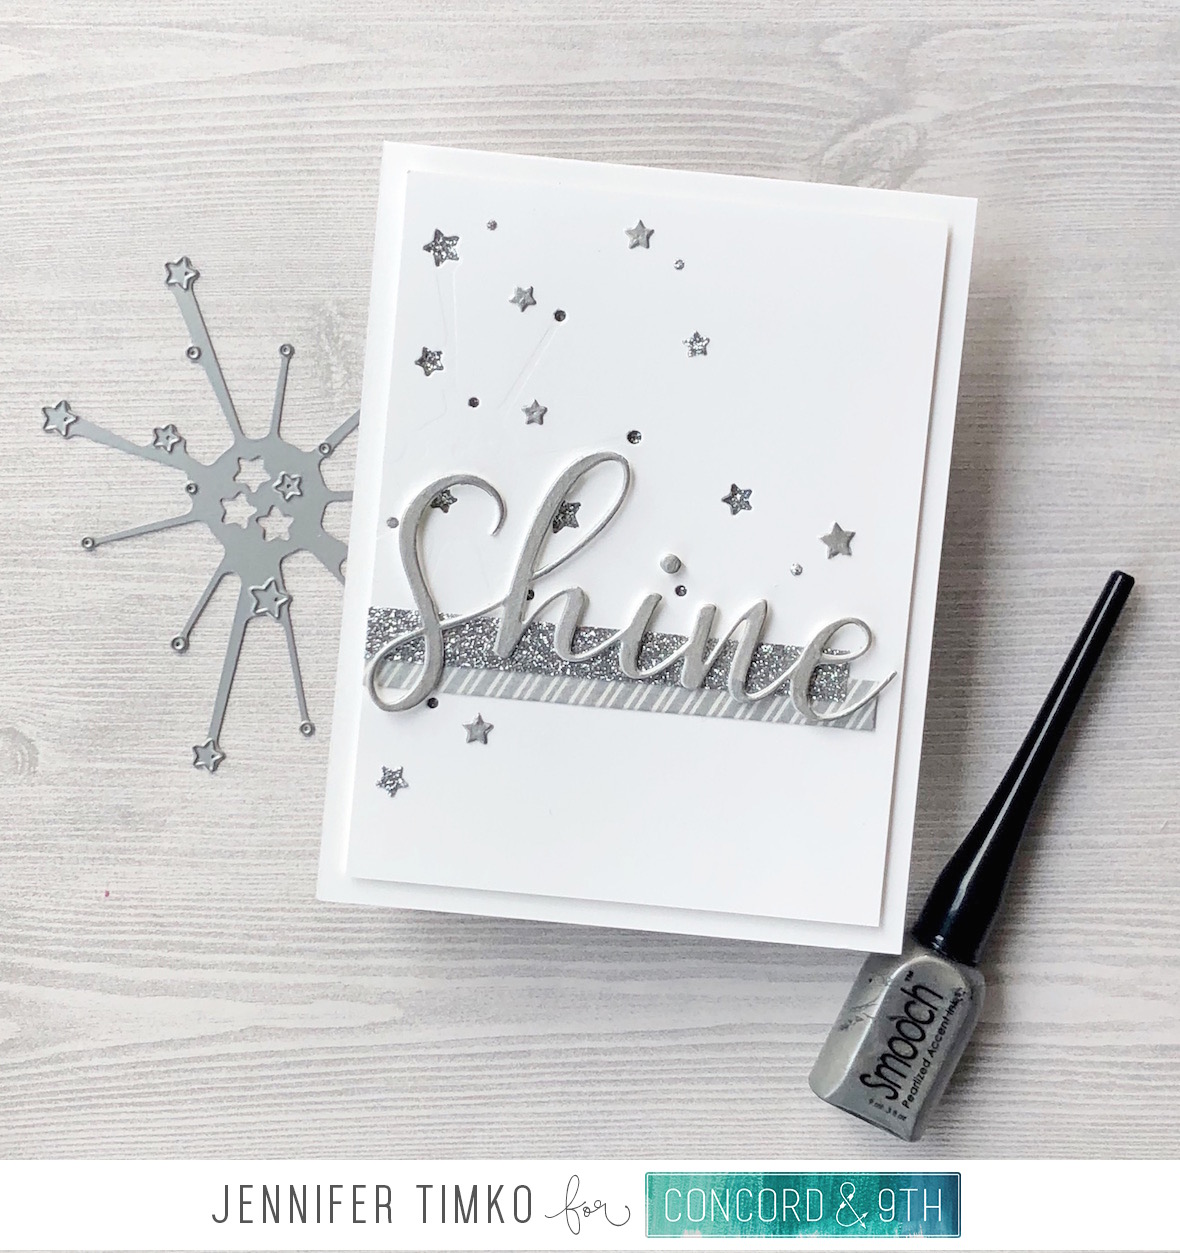 Shine by Jen Timko | Star Turnabout Dies by Concord and 9th, Shine On Dies by Concord and 9th, Neutrals Glitter Paper Pack, Smooch Accent Ink by Clearsnap